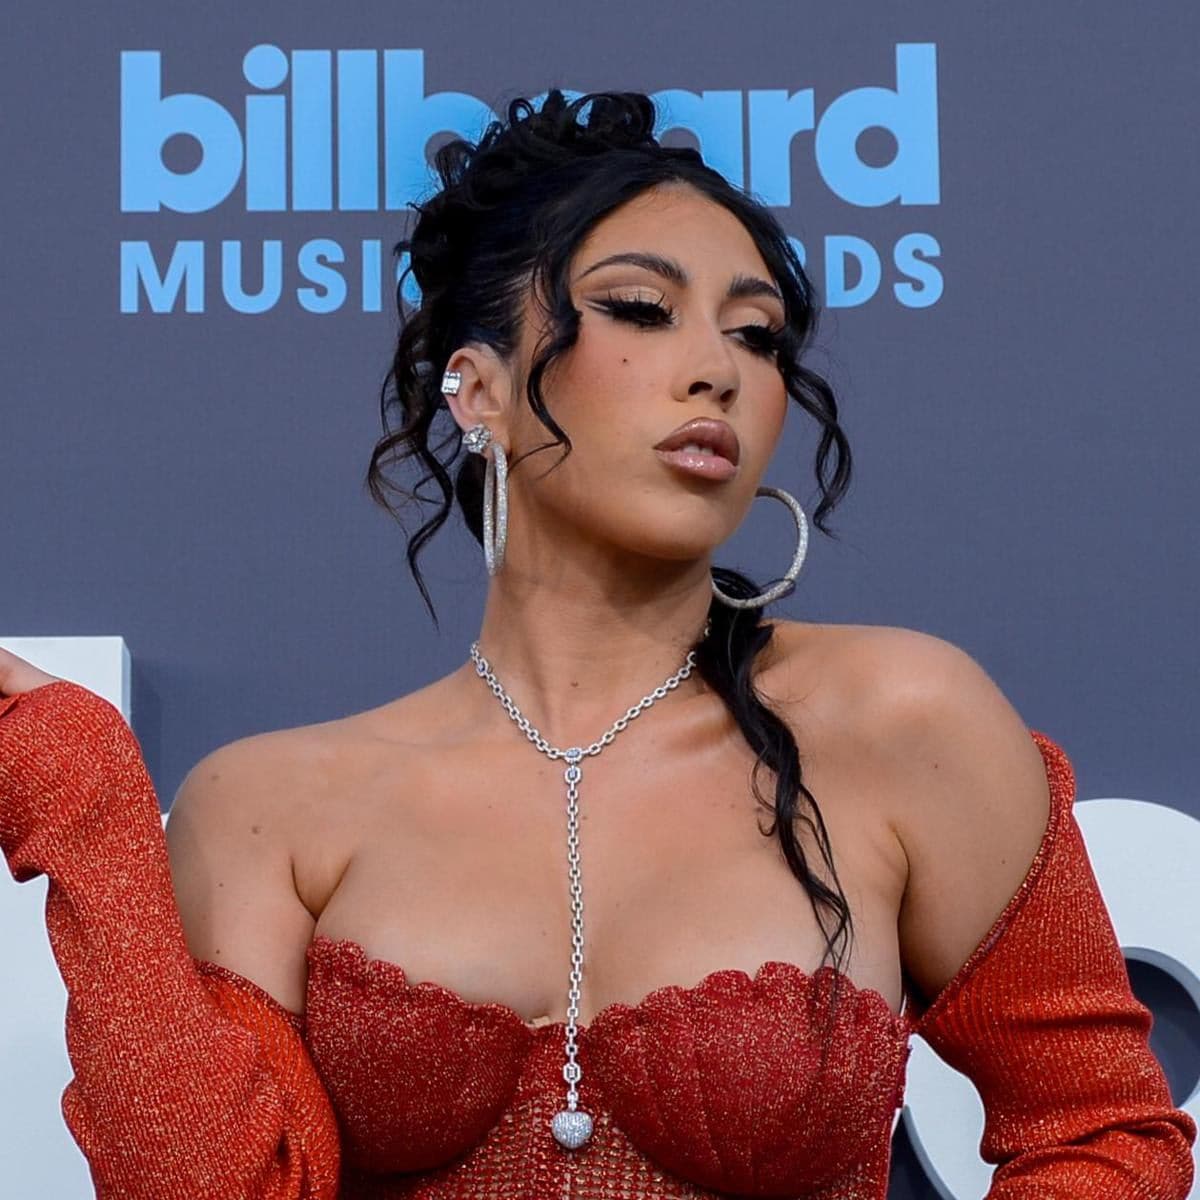 'Fue Mejor' by Kali Uchis (feat. SZA)